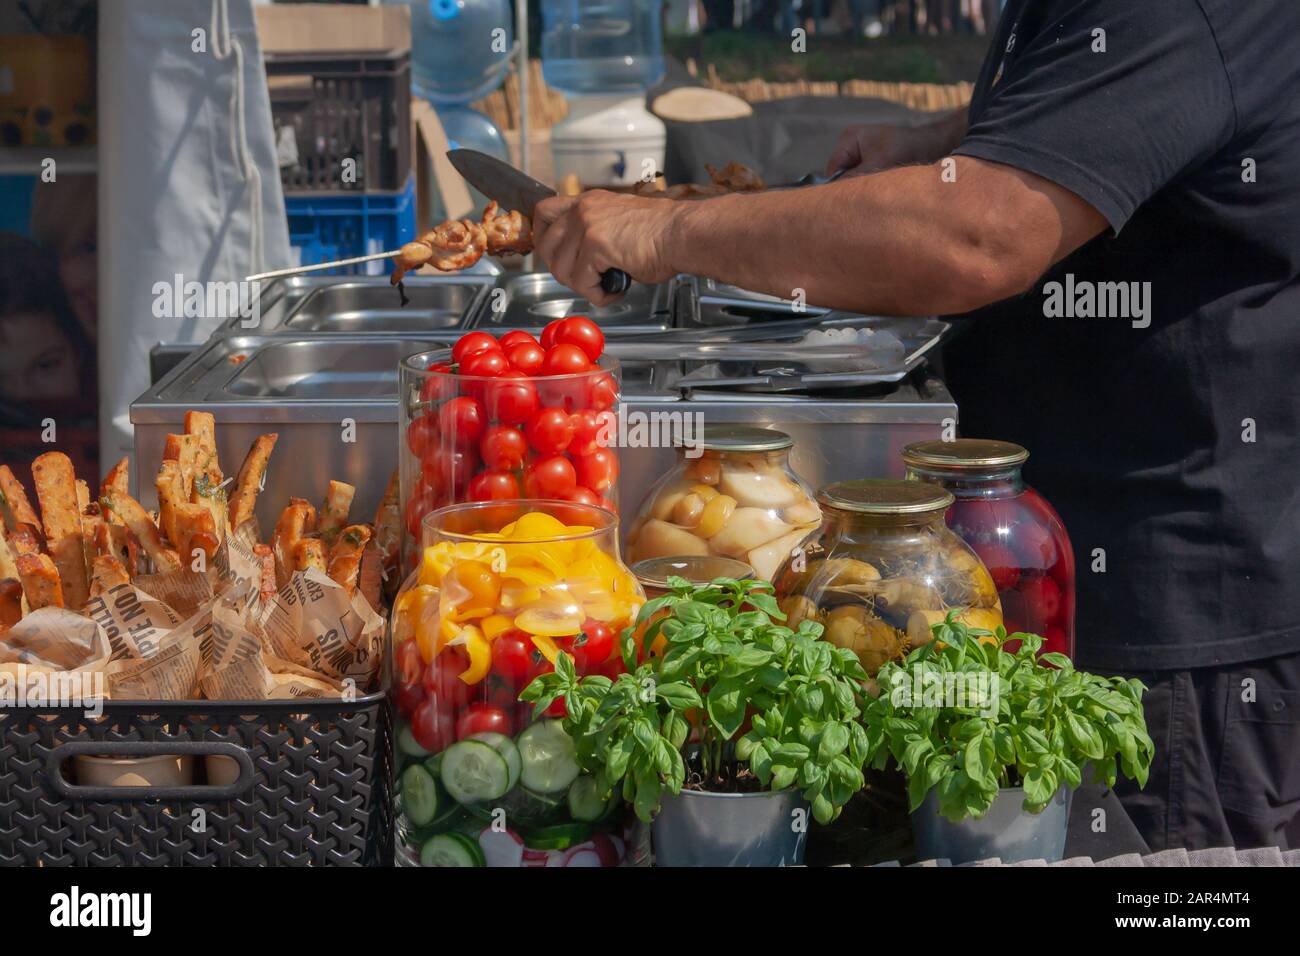 A man sells fresh seasonal vegetables. Tomatoes and basil in the background Stock Photo